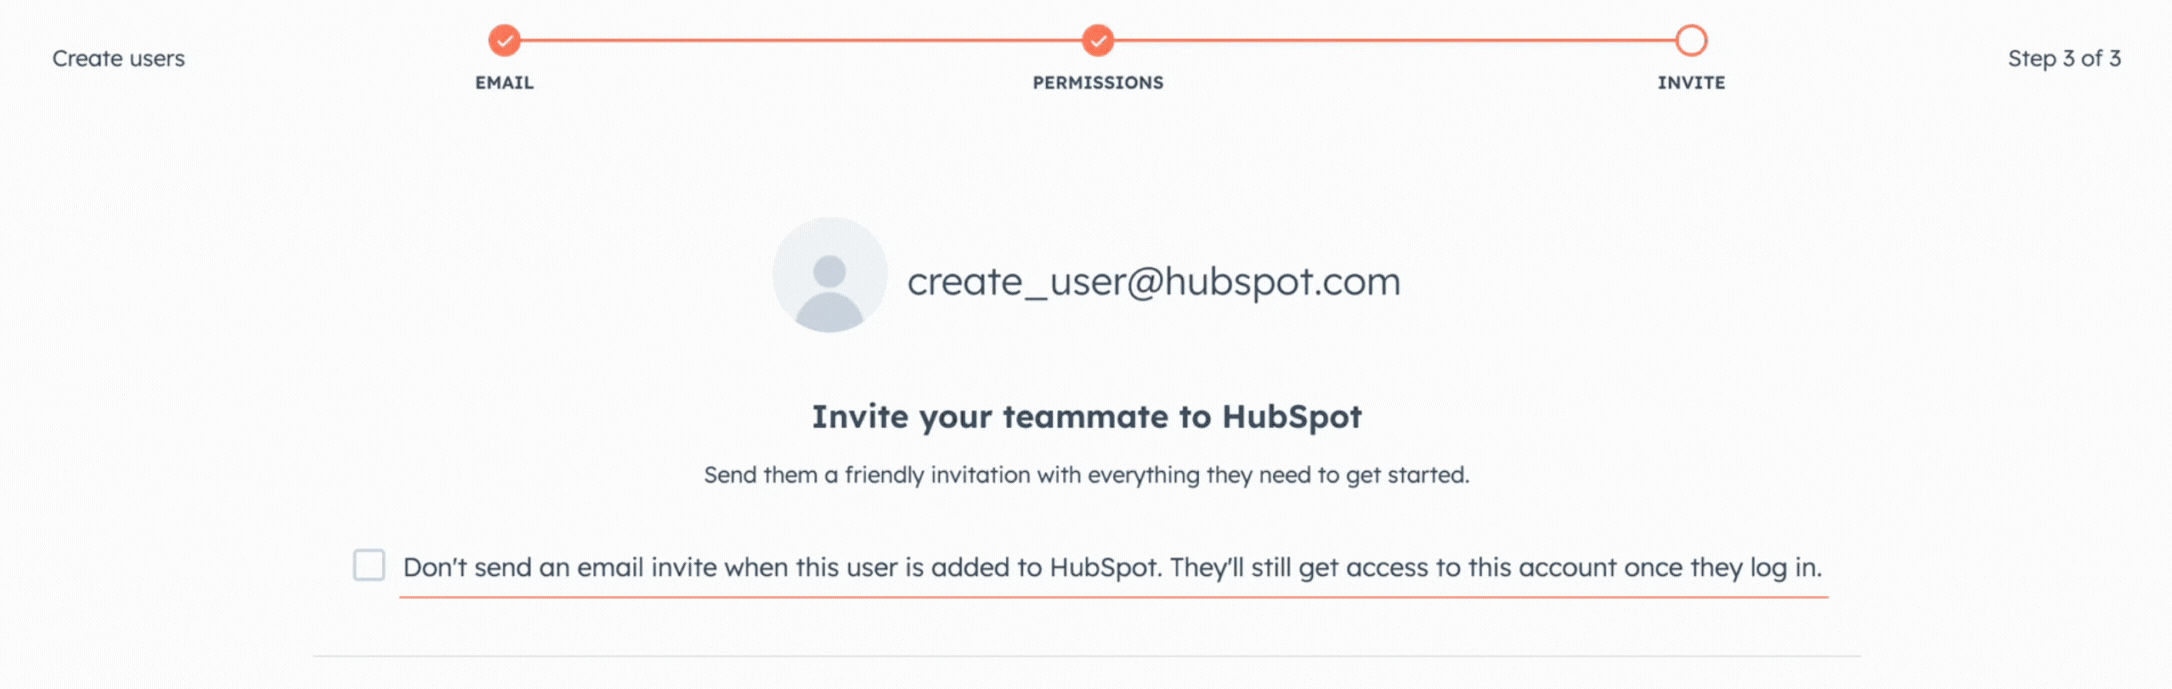 How to HubSpot - Invite User via Email